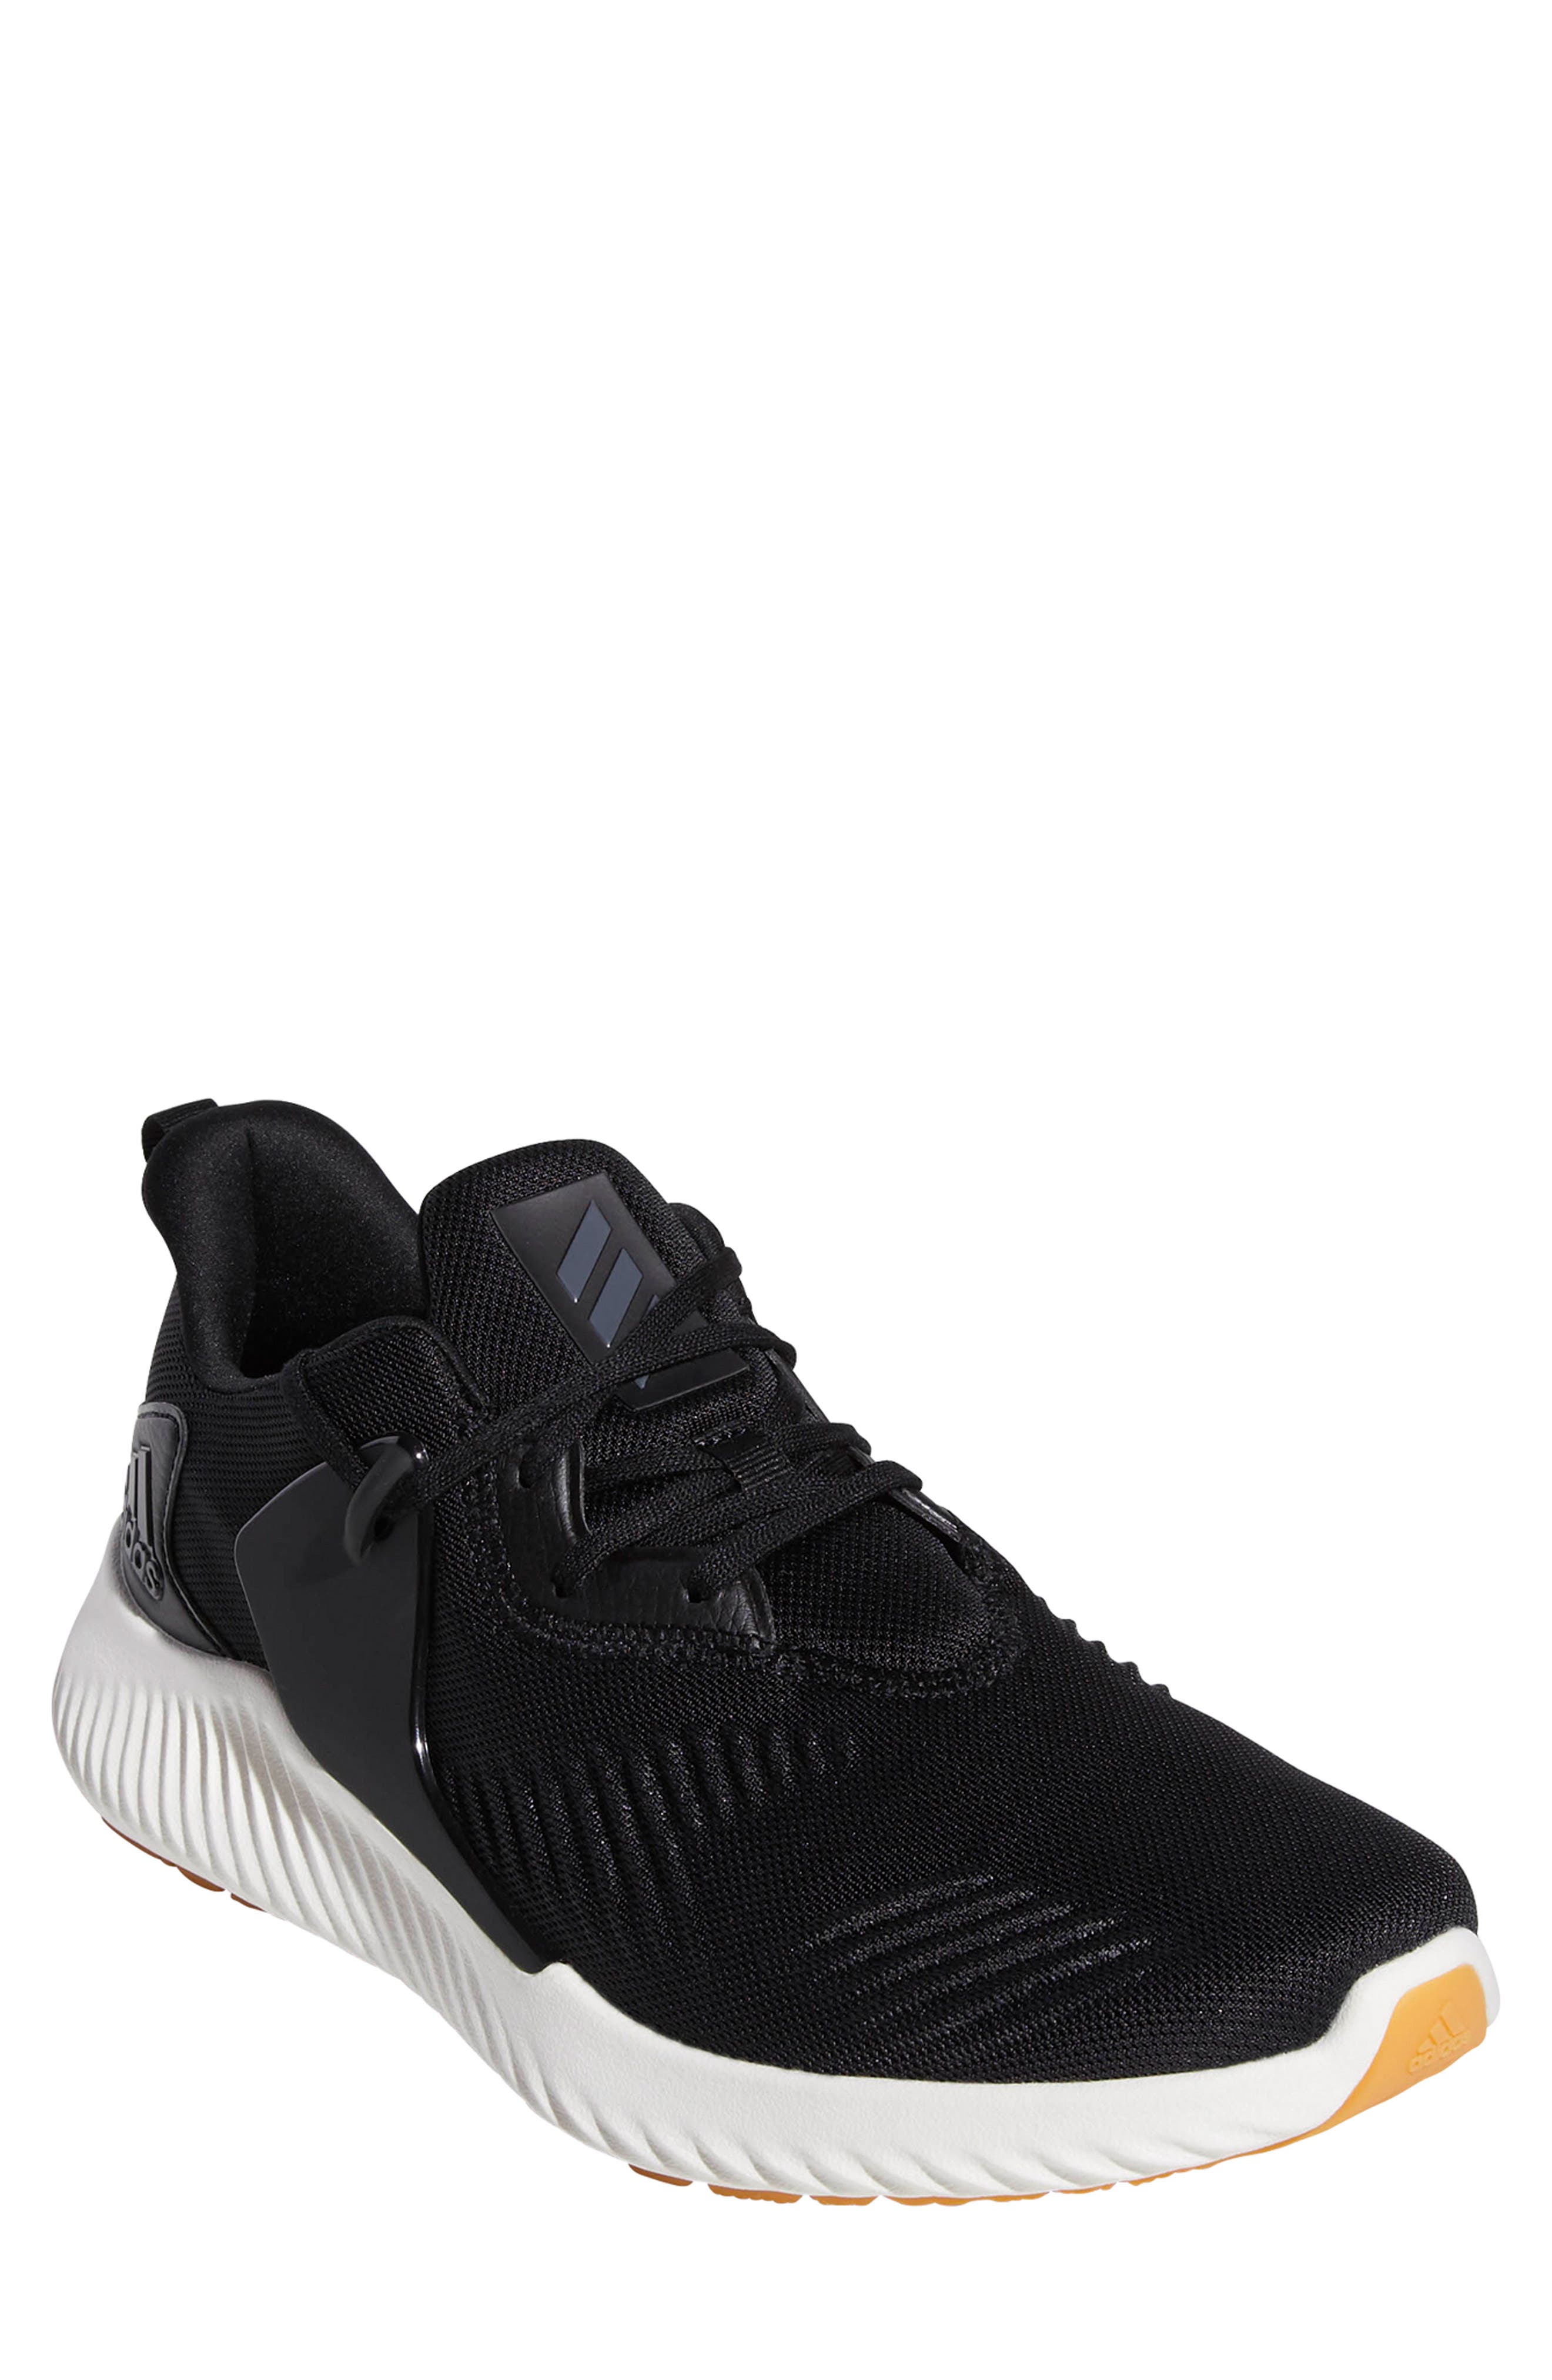 adidas alphabounce rc men's running shoes